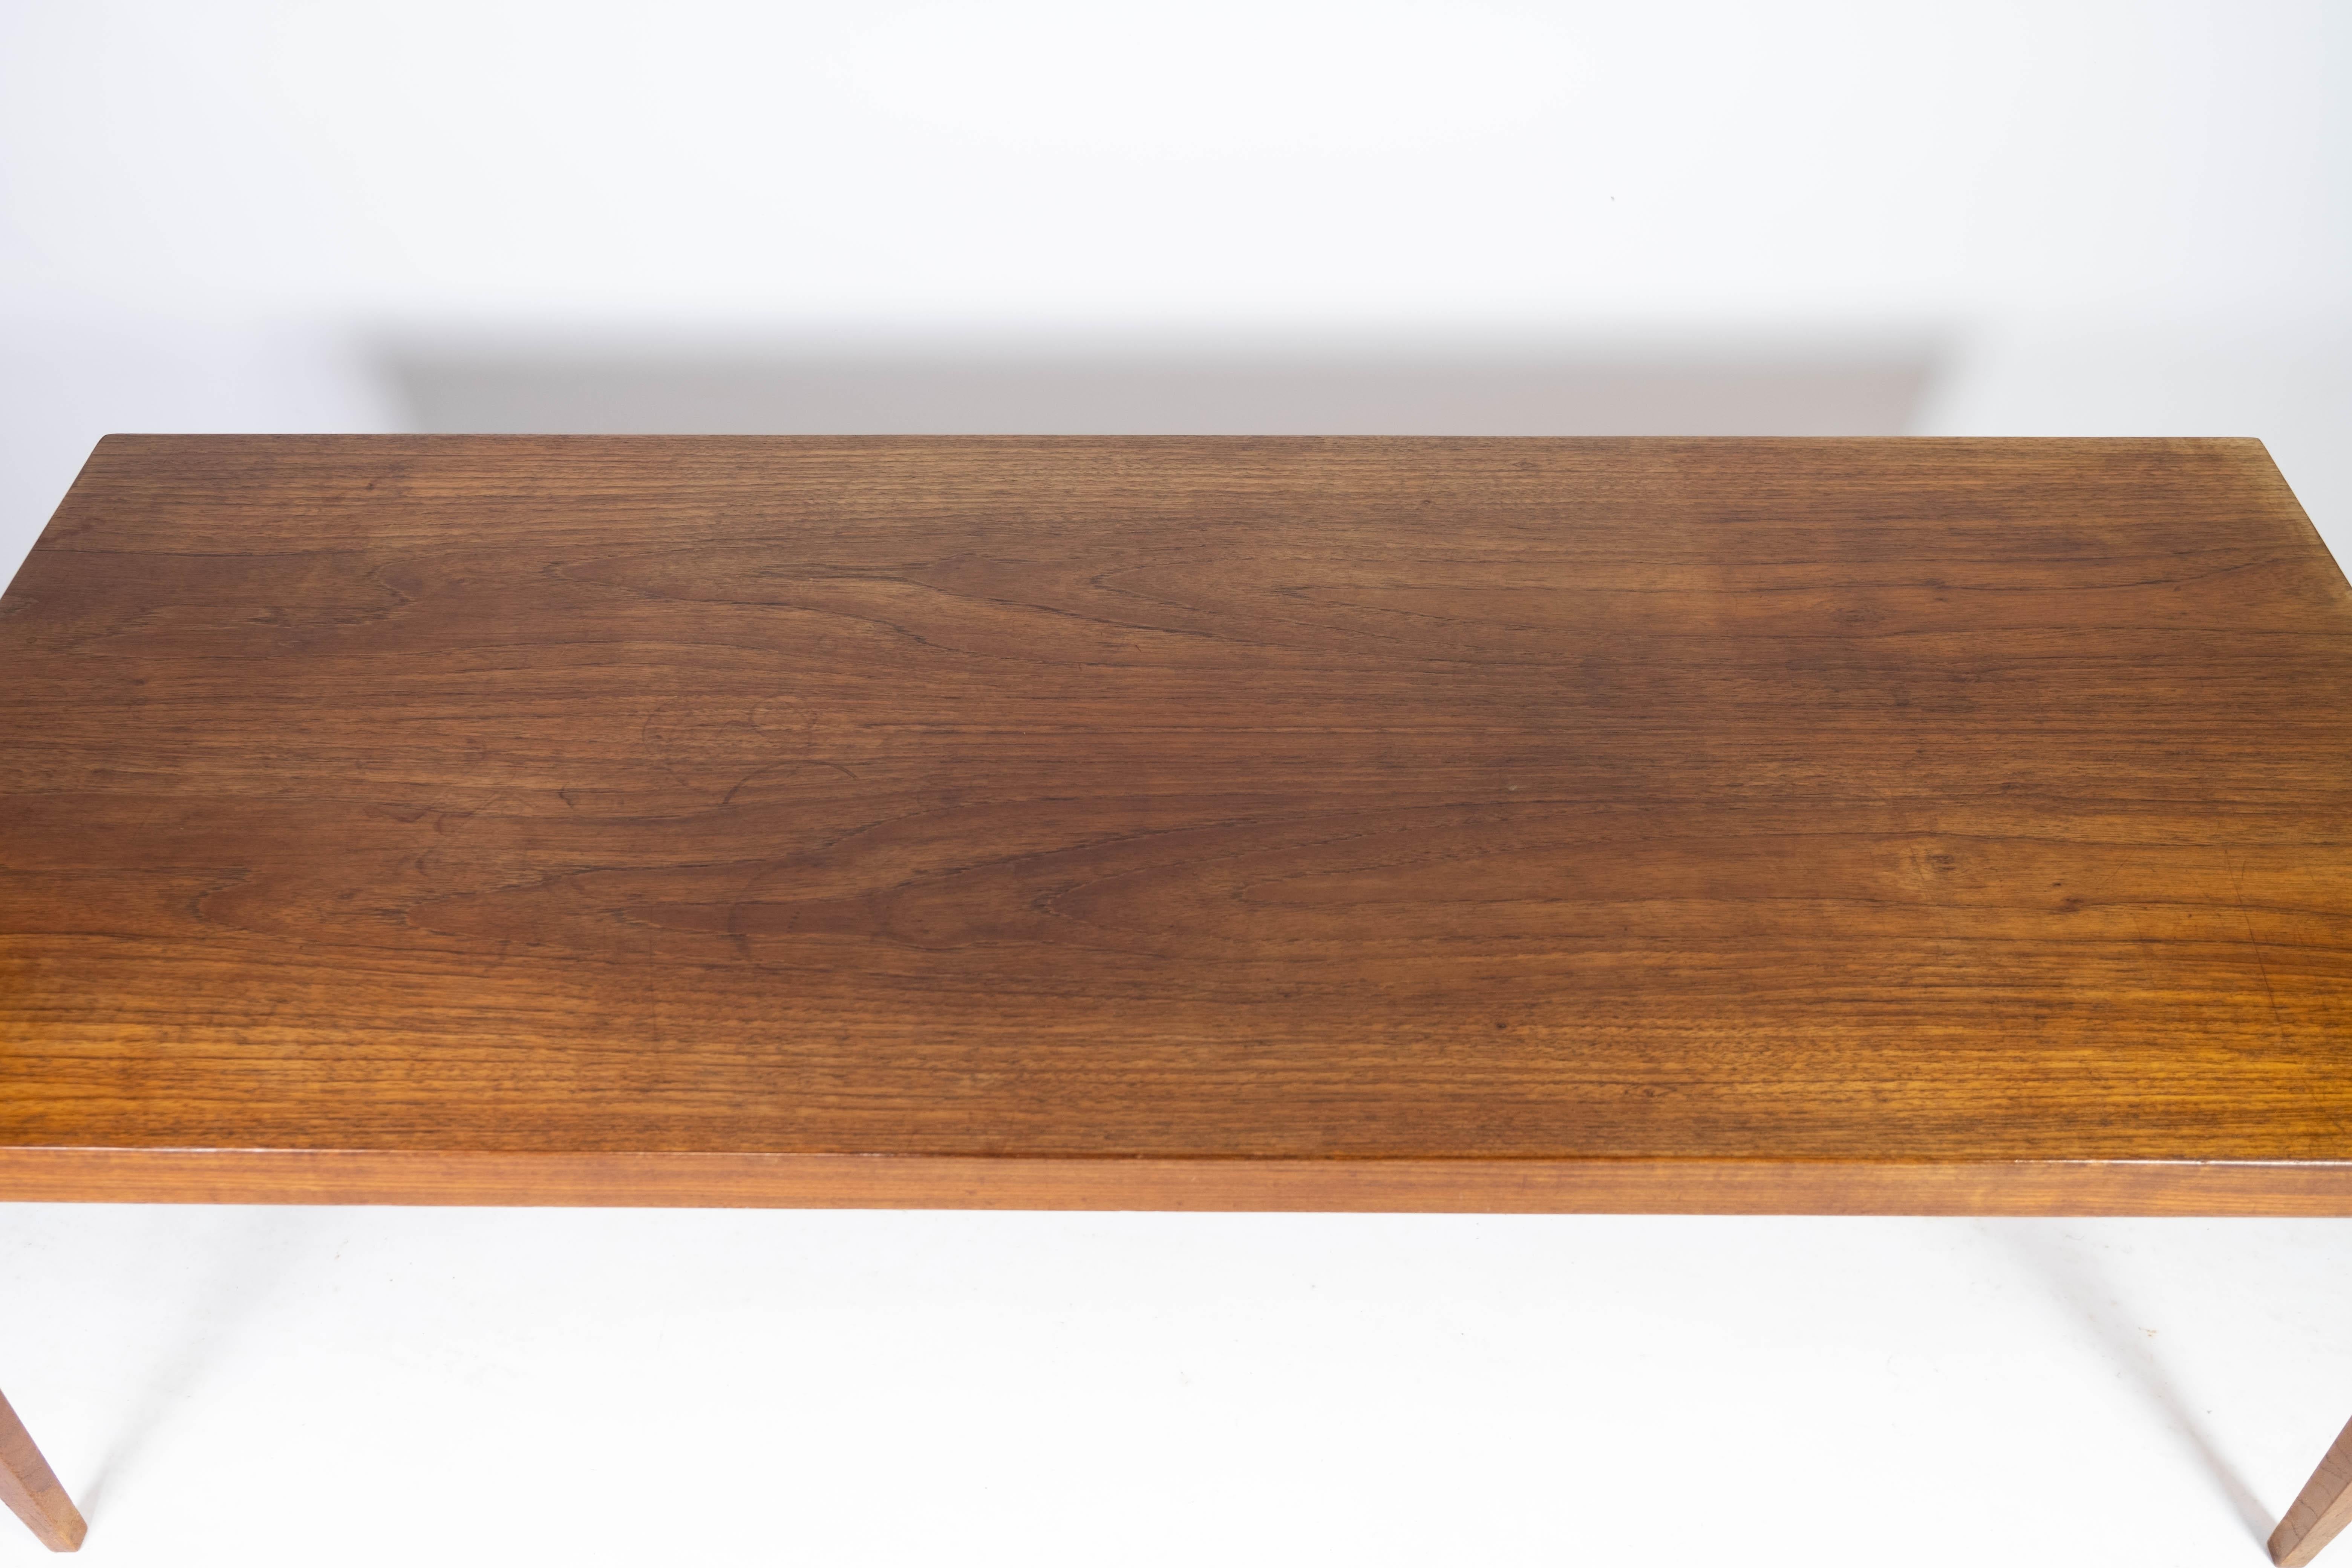 Mid-Century Modern Coffee Table Made In Teak By Severin Hansen Made By Haslev Furniture From 1960s For Sale